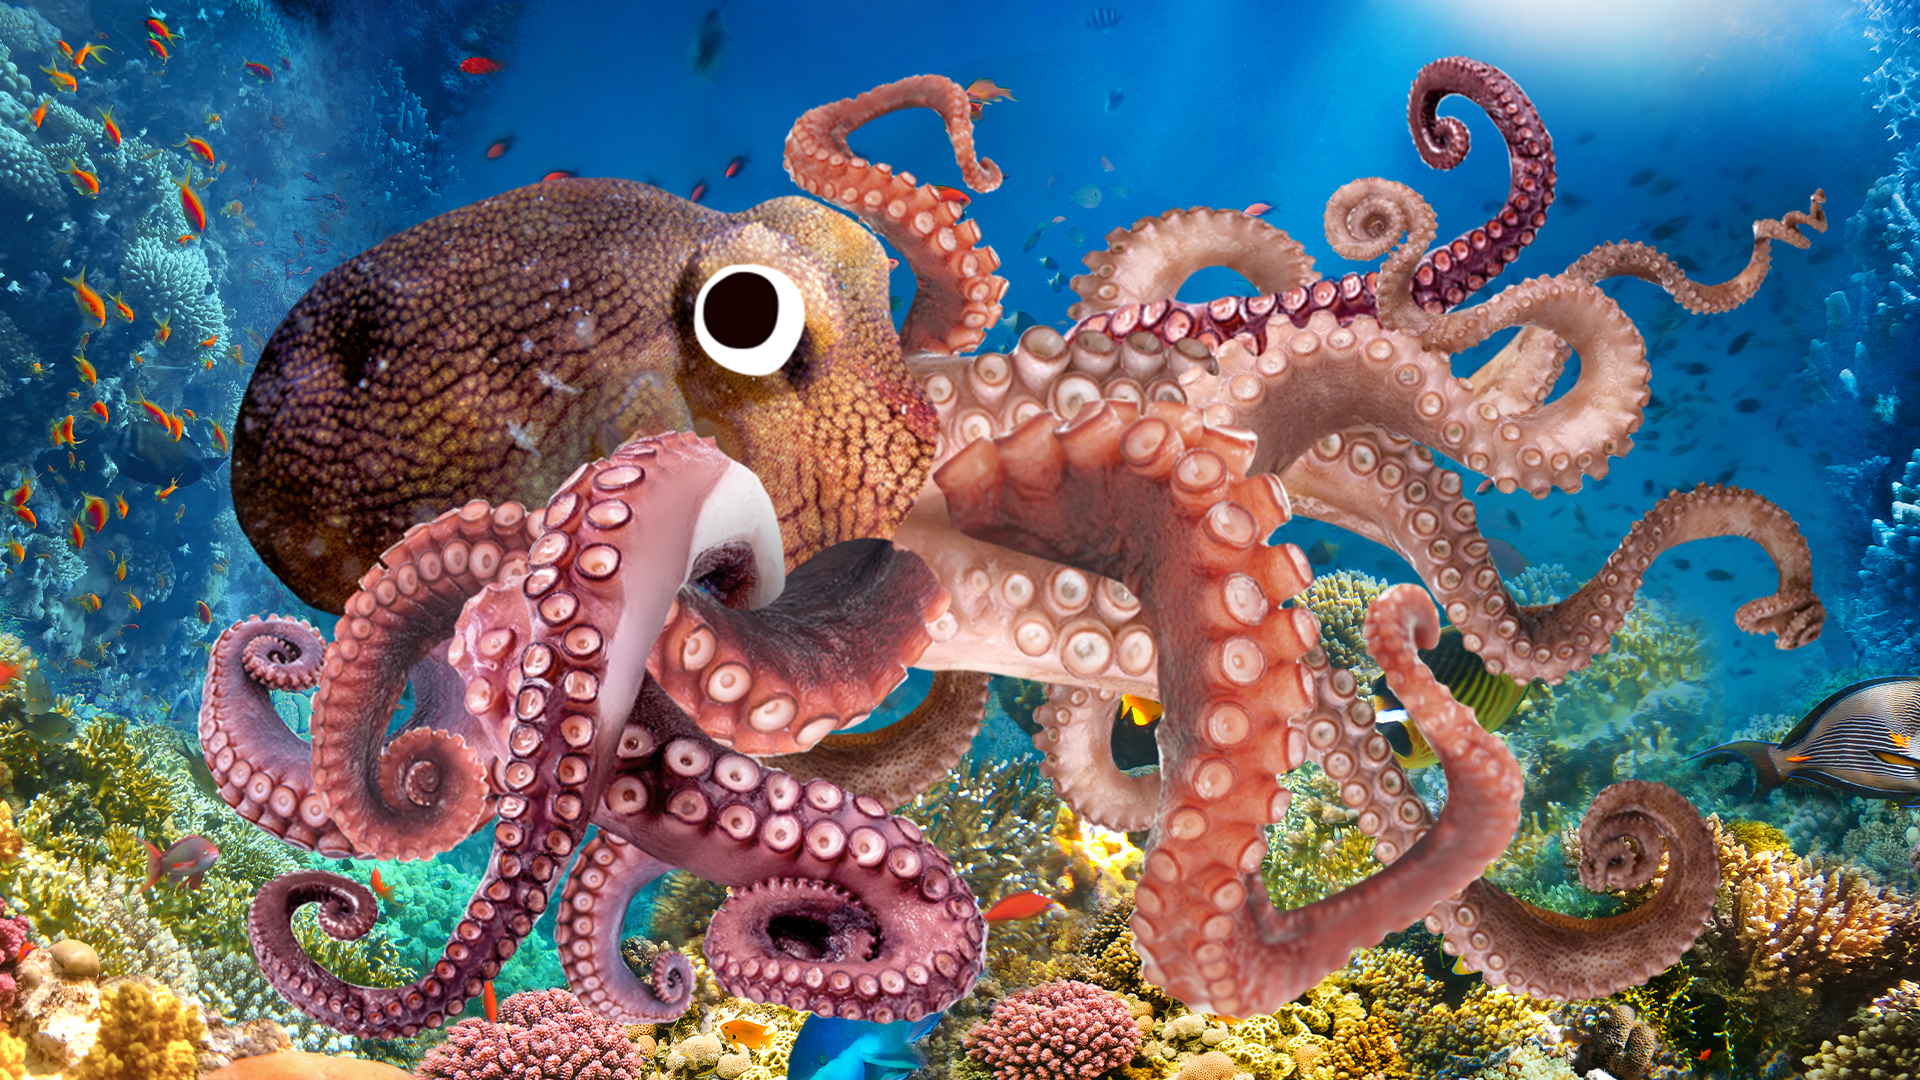 Octopus on coral reef